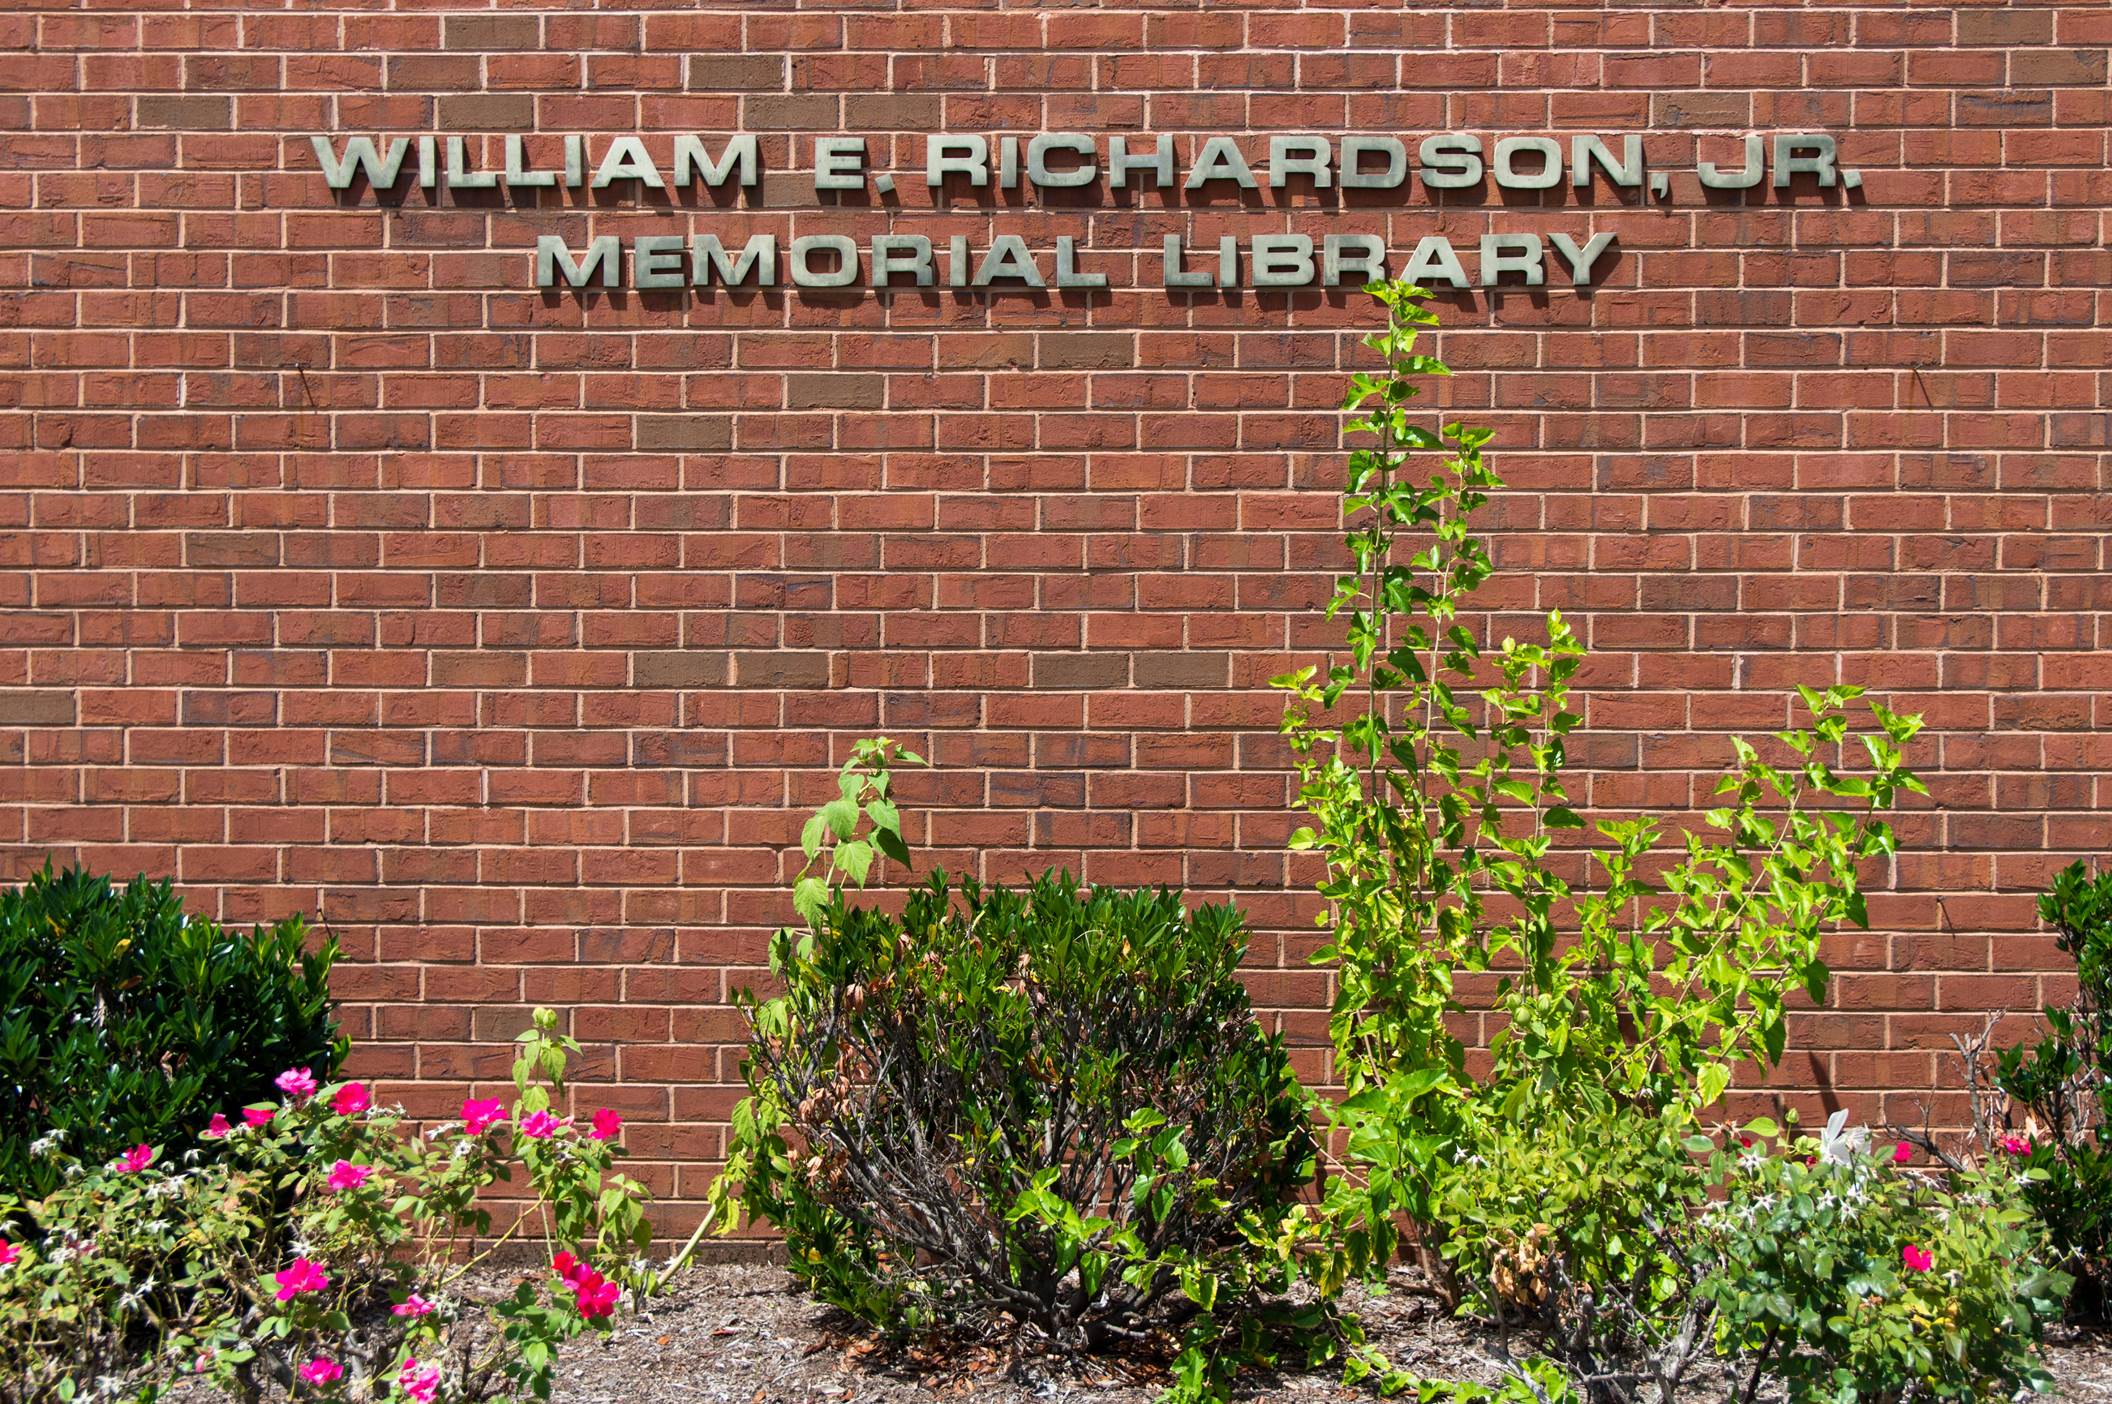 An image of the William E Richardson Memorial Library